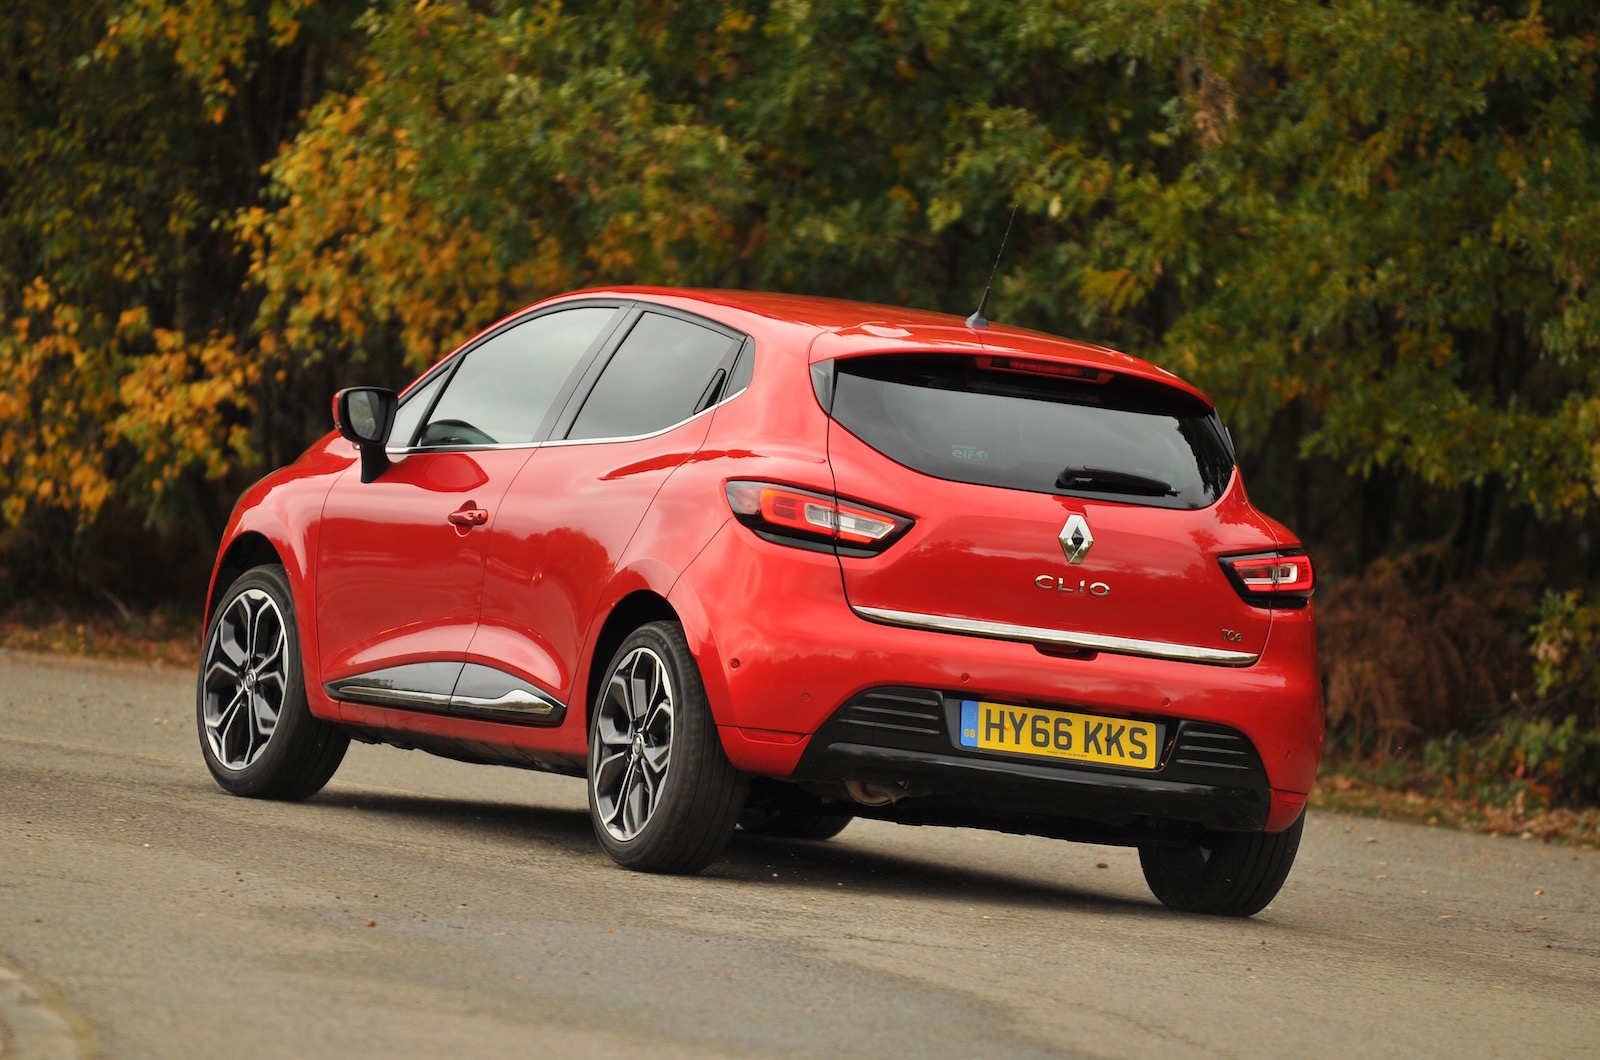 File:2016 Renault Clio IV Energy TCe 90 Dynamique 5dr, rear right.jpg -  Wikimedia Commons